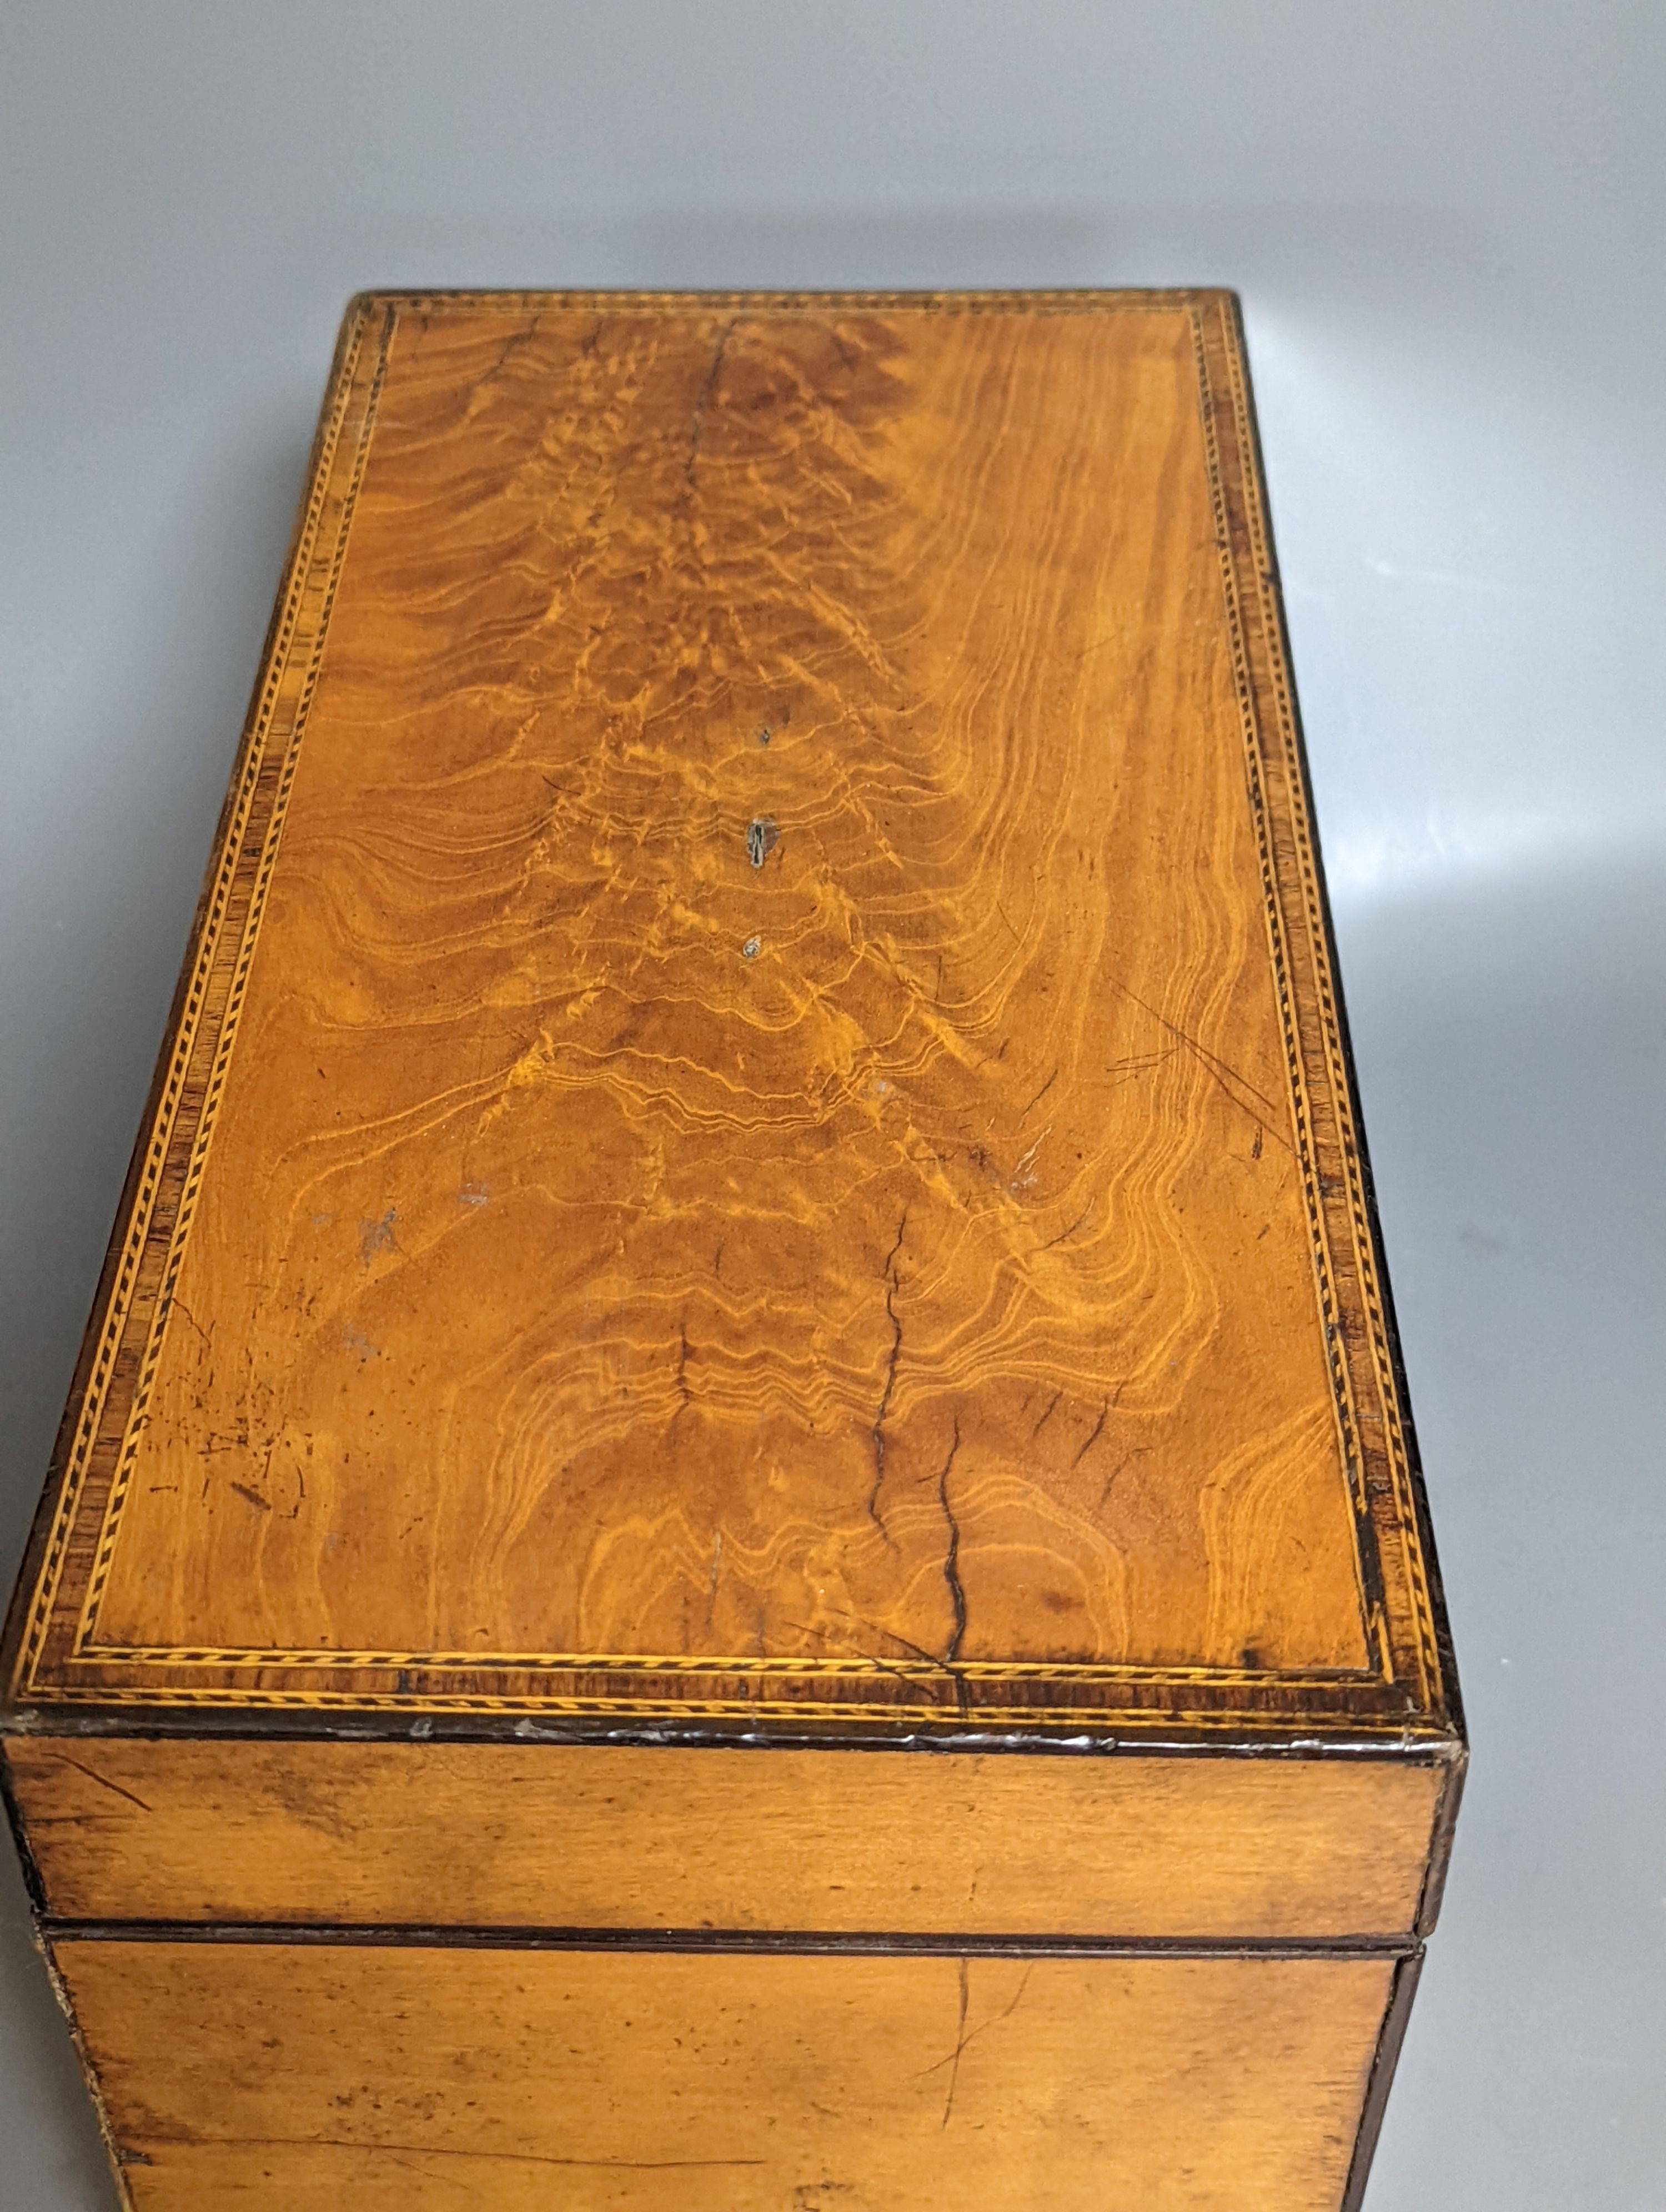 An early 19th century West Indian satinwood tea caddy 33cm